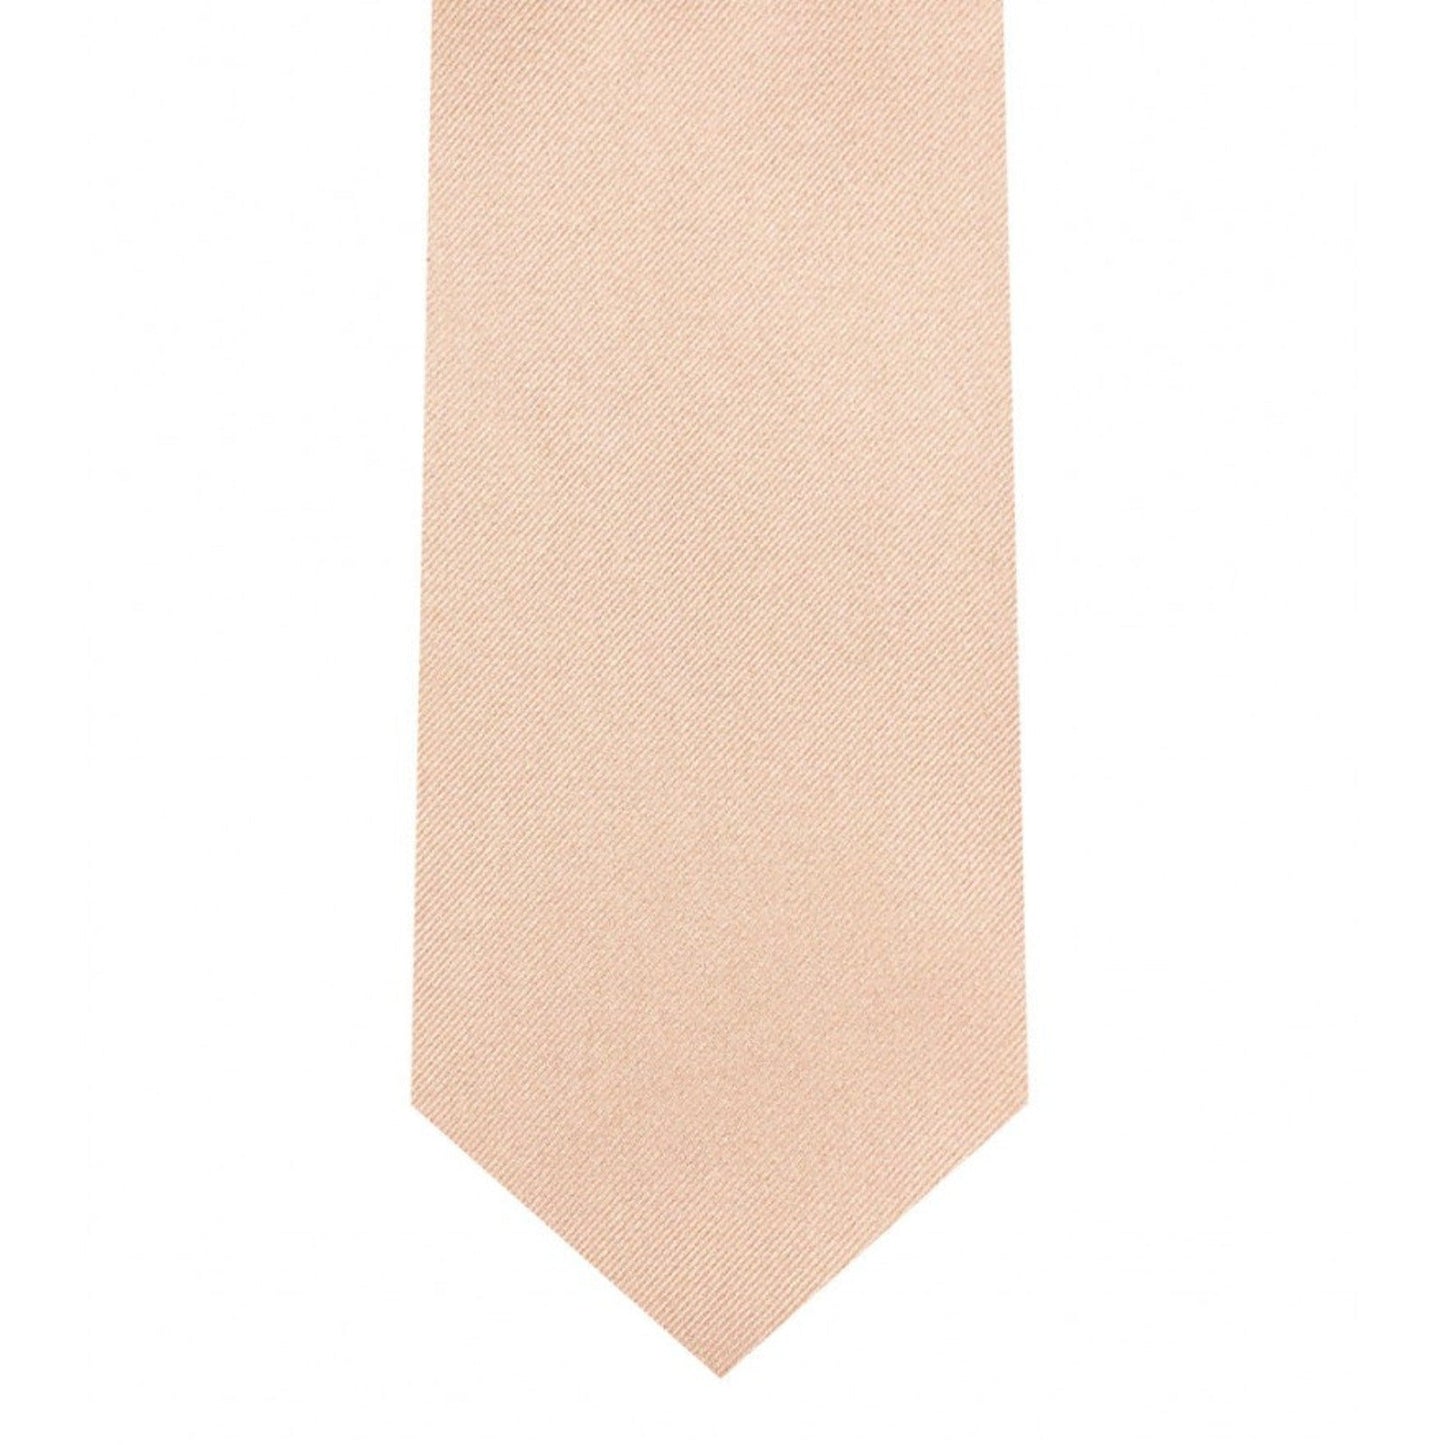 Classic Blush Tie Skinny width 2.75 inches With Matching Pocket Square | KCT Menswear